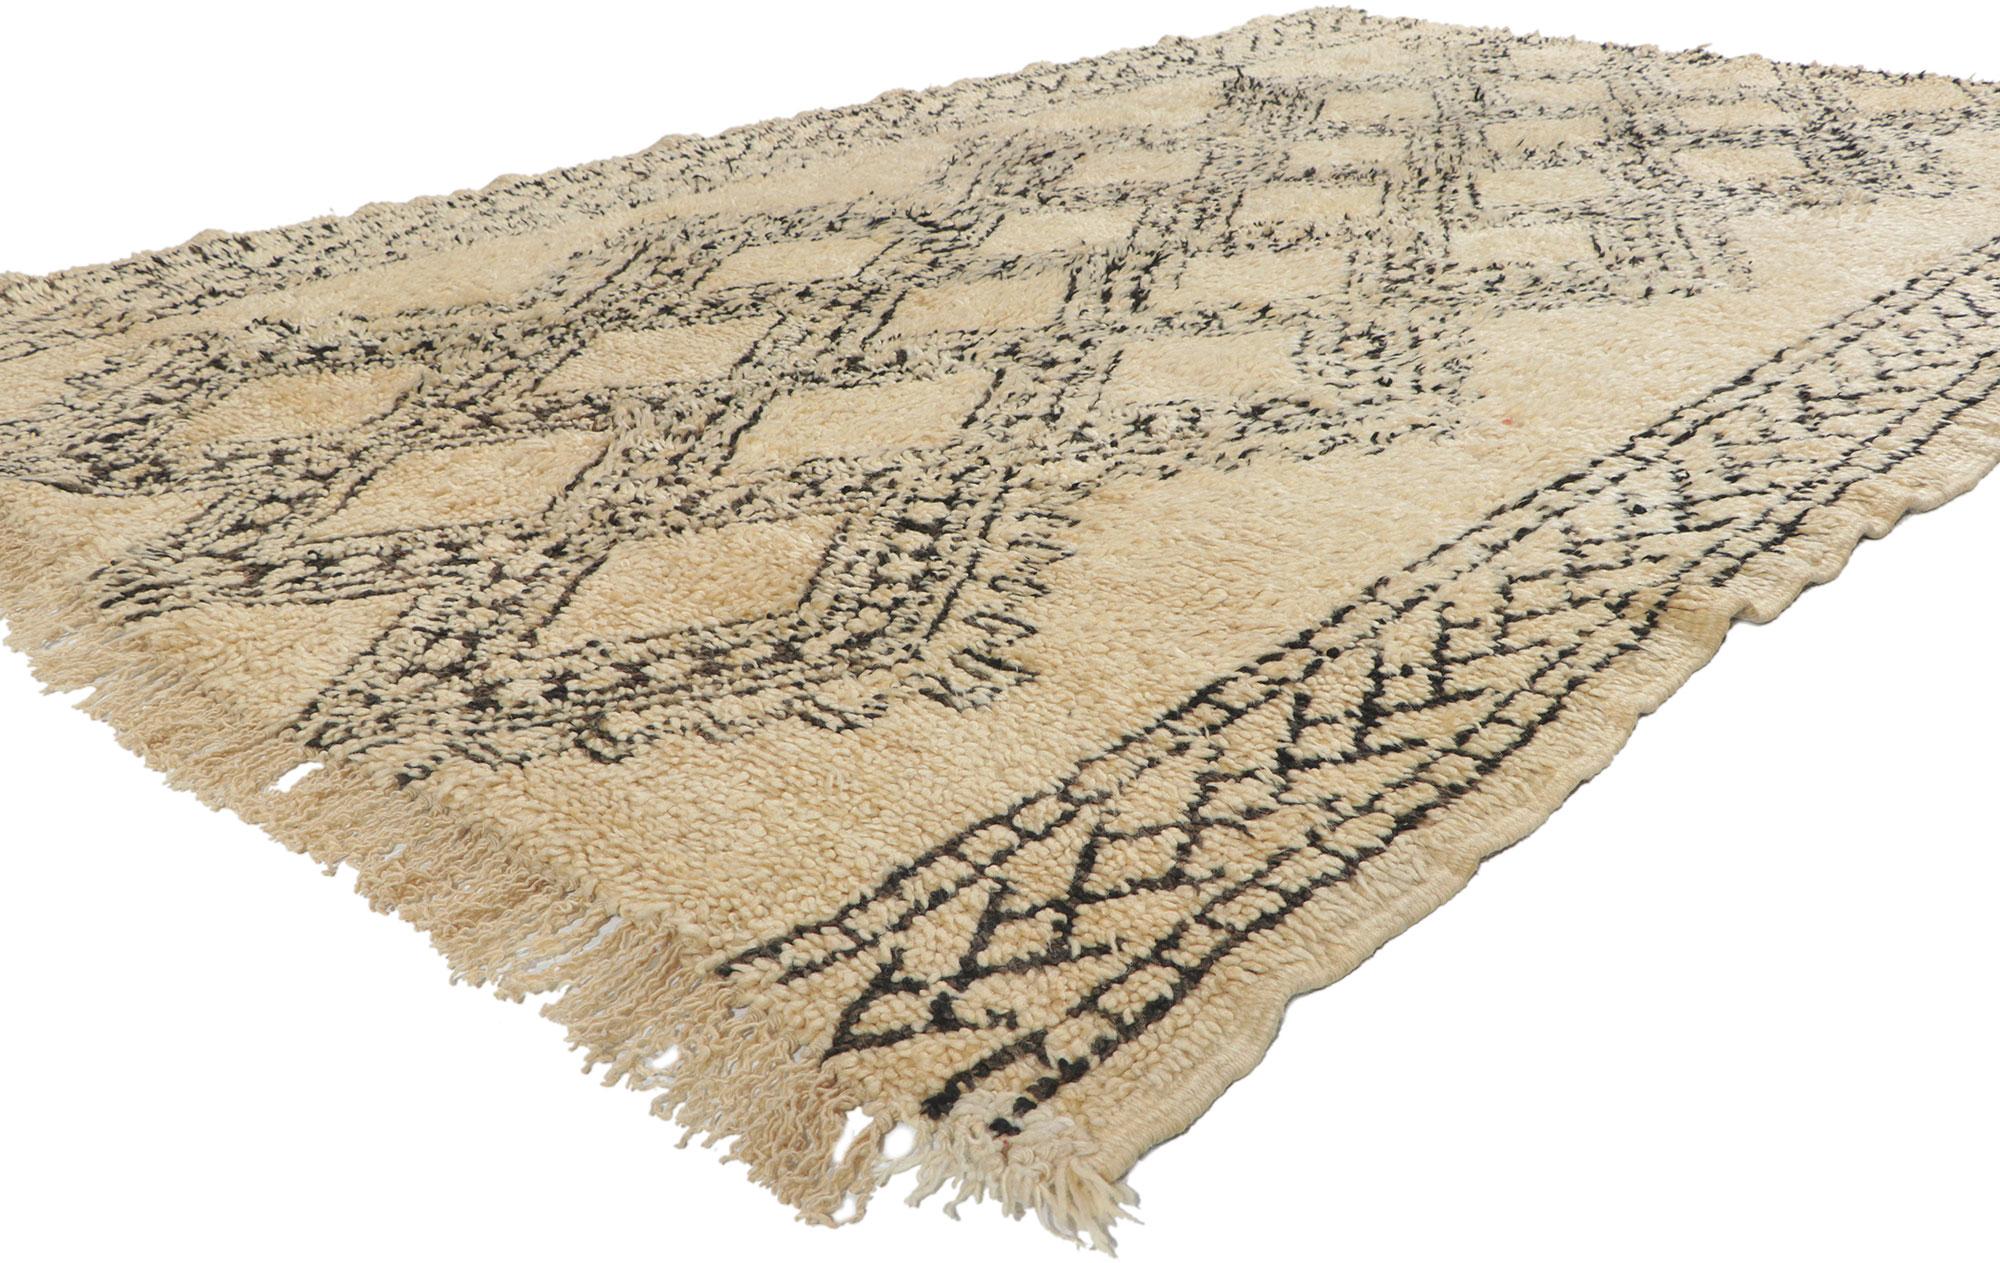 78382 Vintage Moroccan Beni Ourain rug, 06'00 x 09'07. With its simplicity, plush pile, incredible detail and texture, this hand knotted wool vintage Beni Ourain Moroccan rug is a captivating vision of woven beauty. The eye-catching diamond trellis